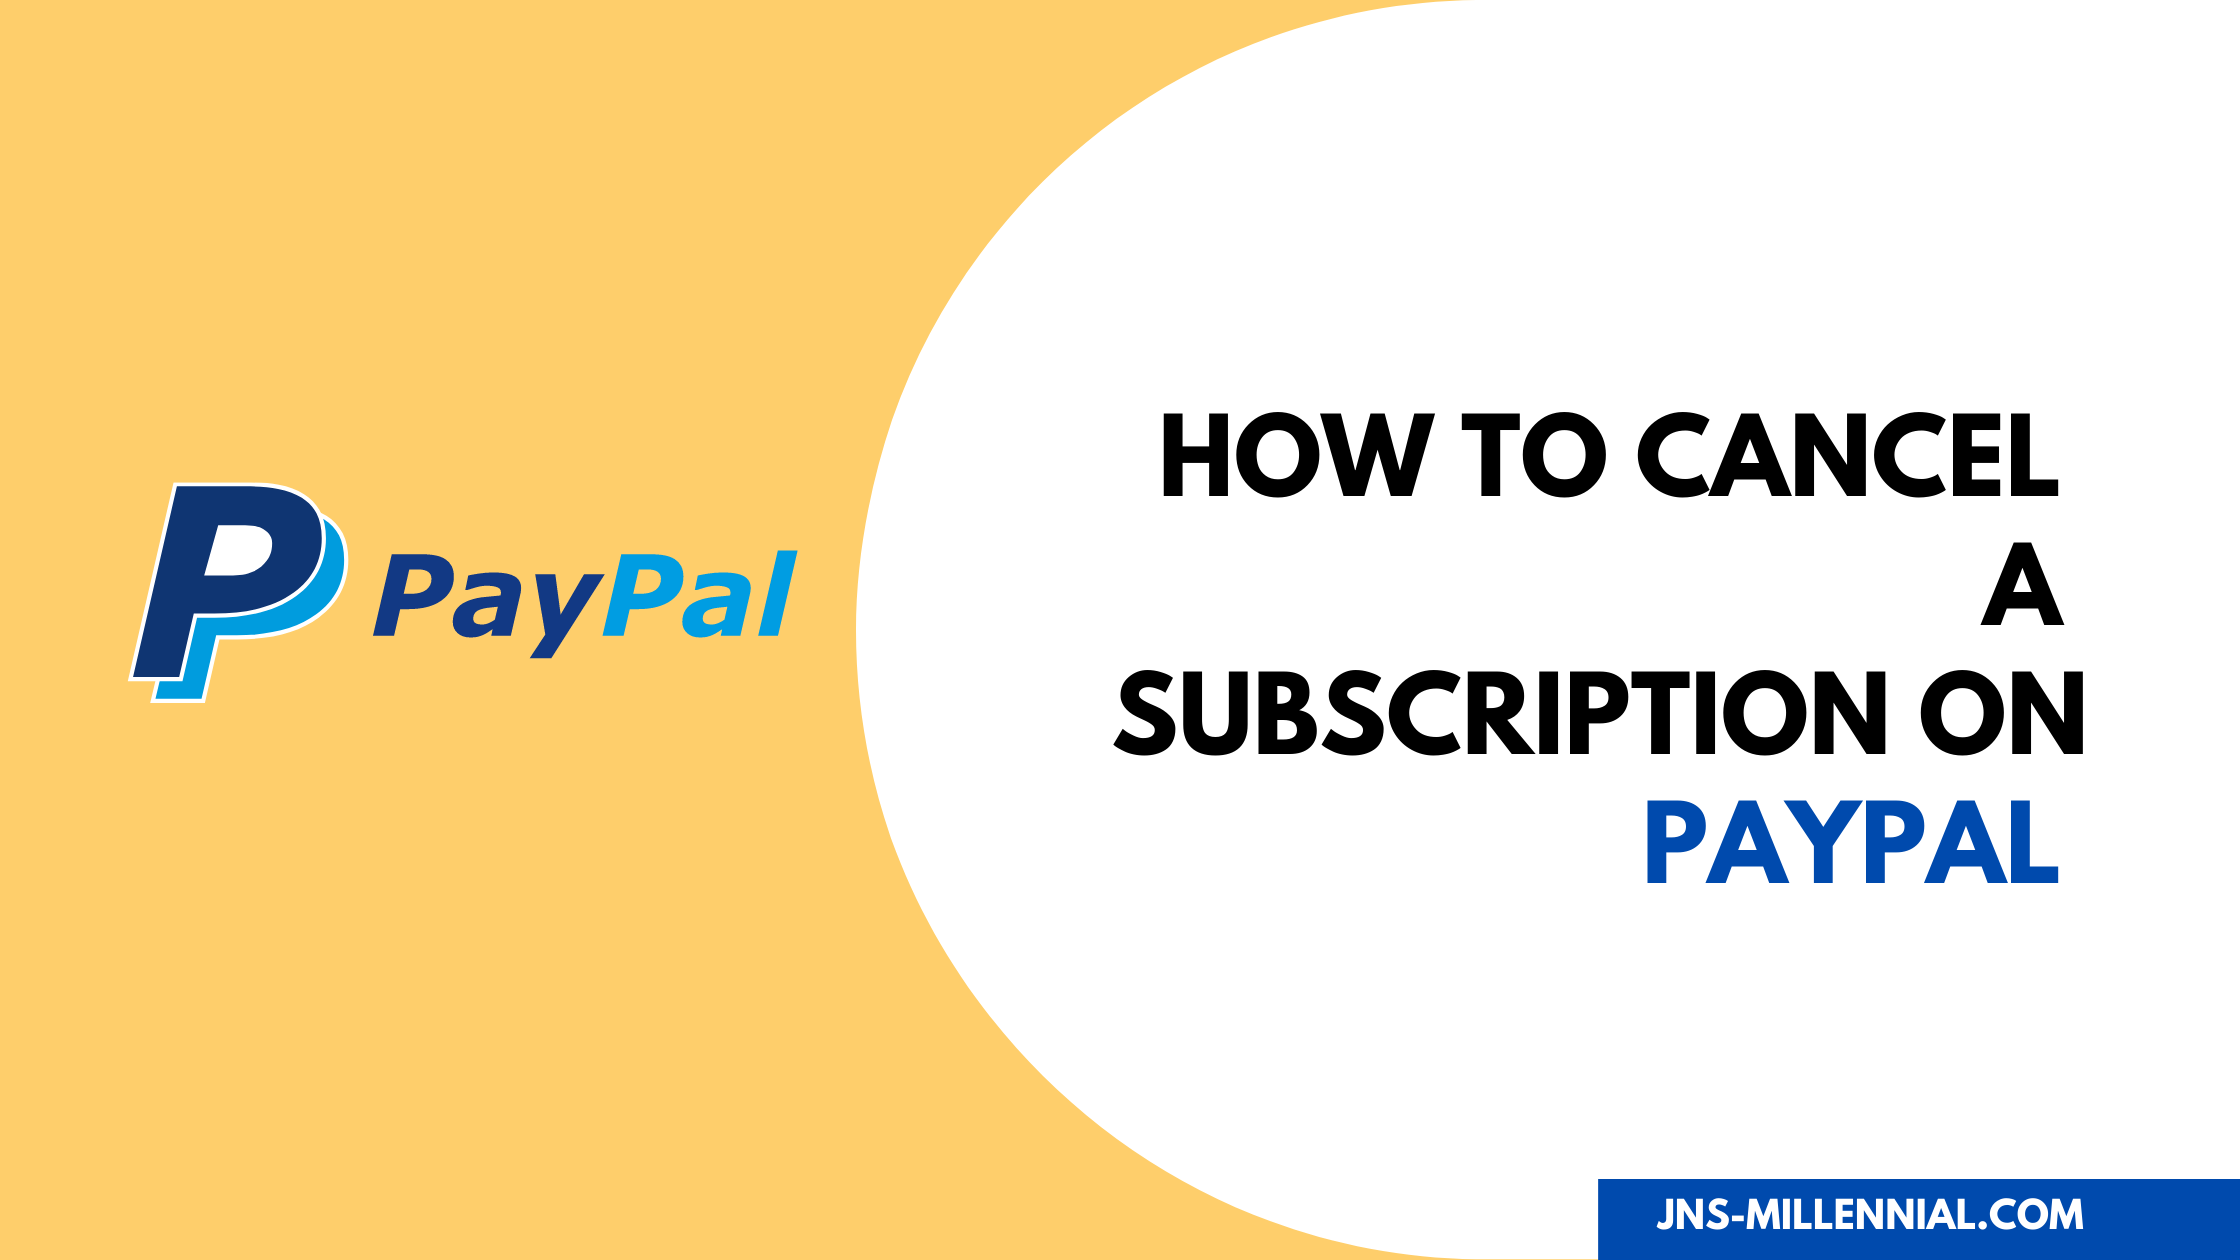 How To Cancel A Subscription on My PayPal Account